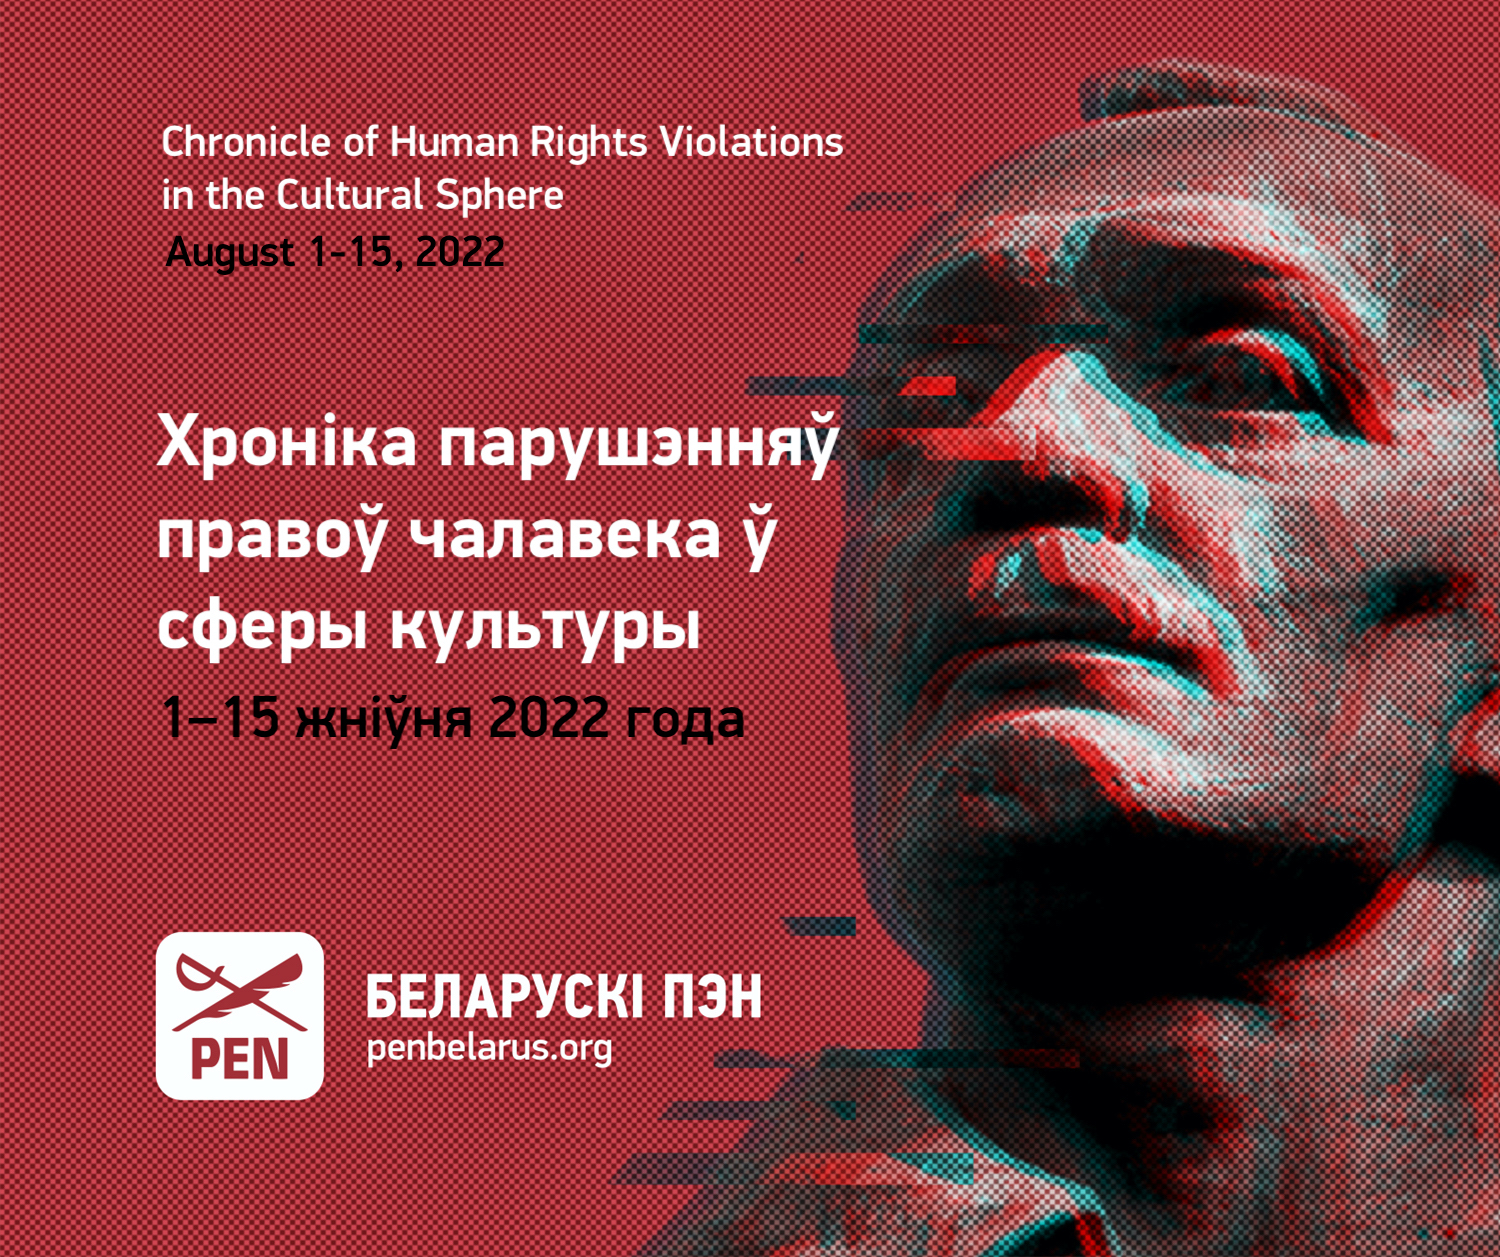 Chronicle of Human Rights Violations in the Cultural Sphere (August 1-15, 2022)